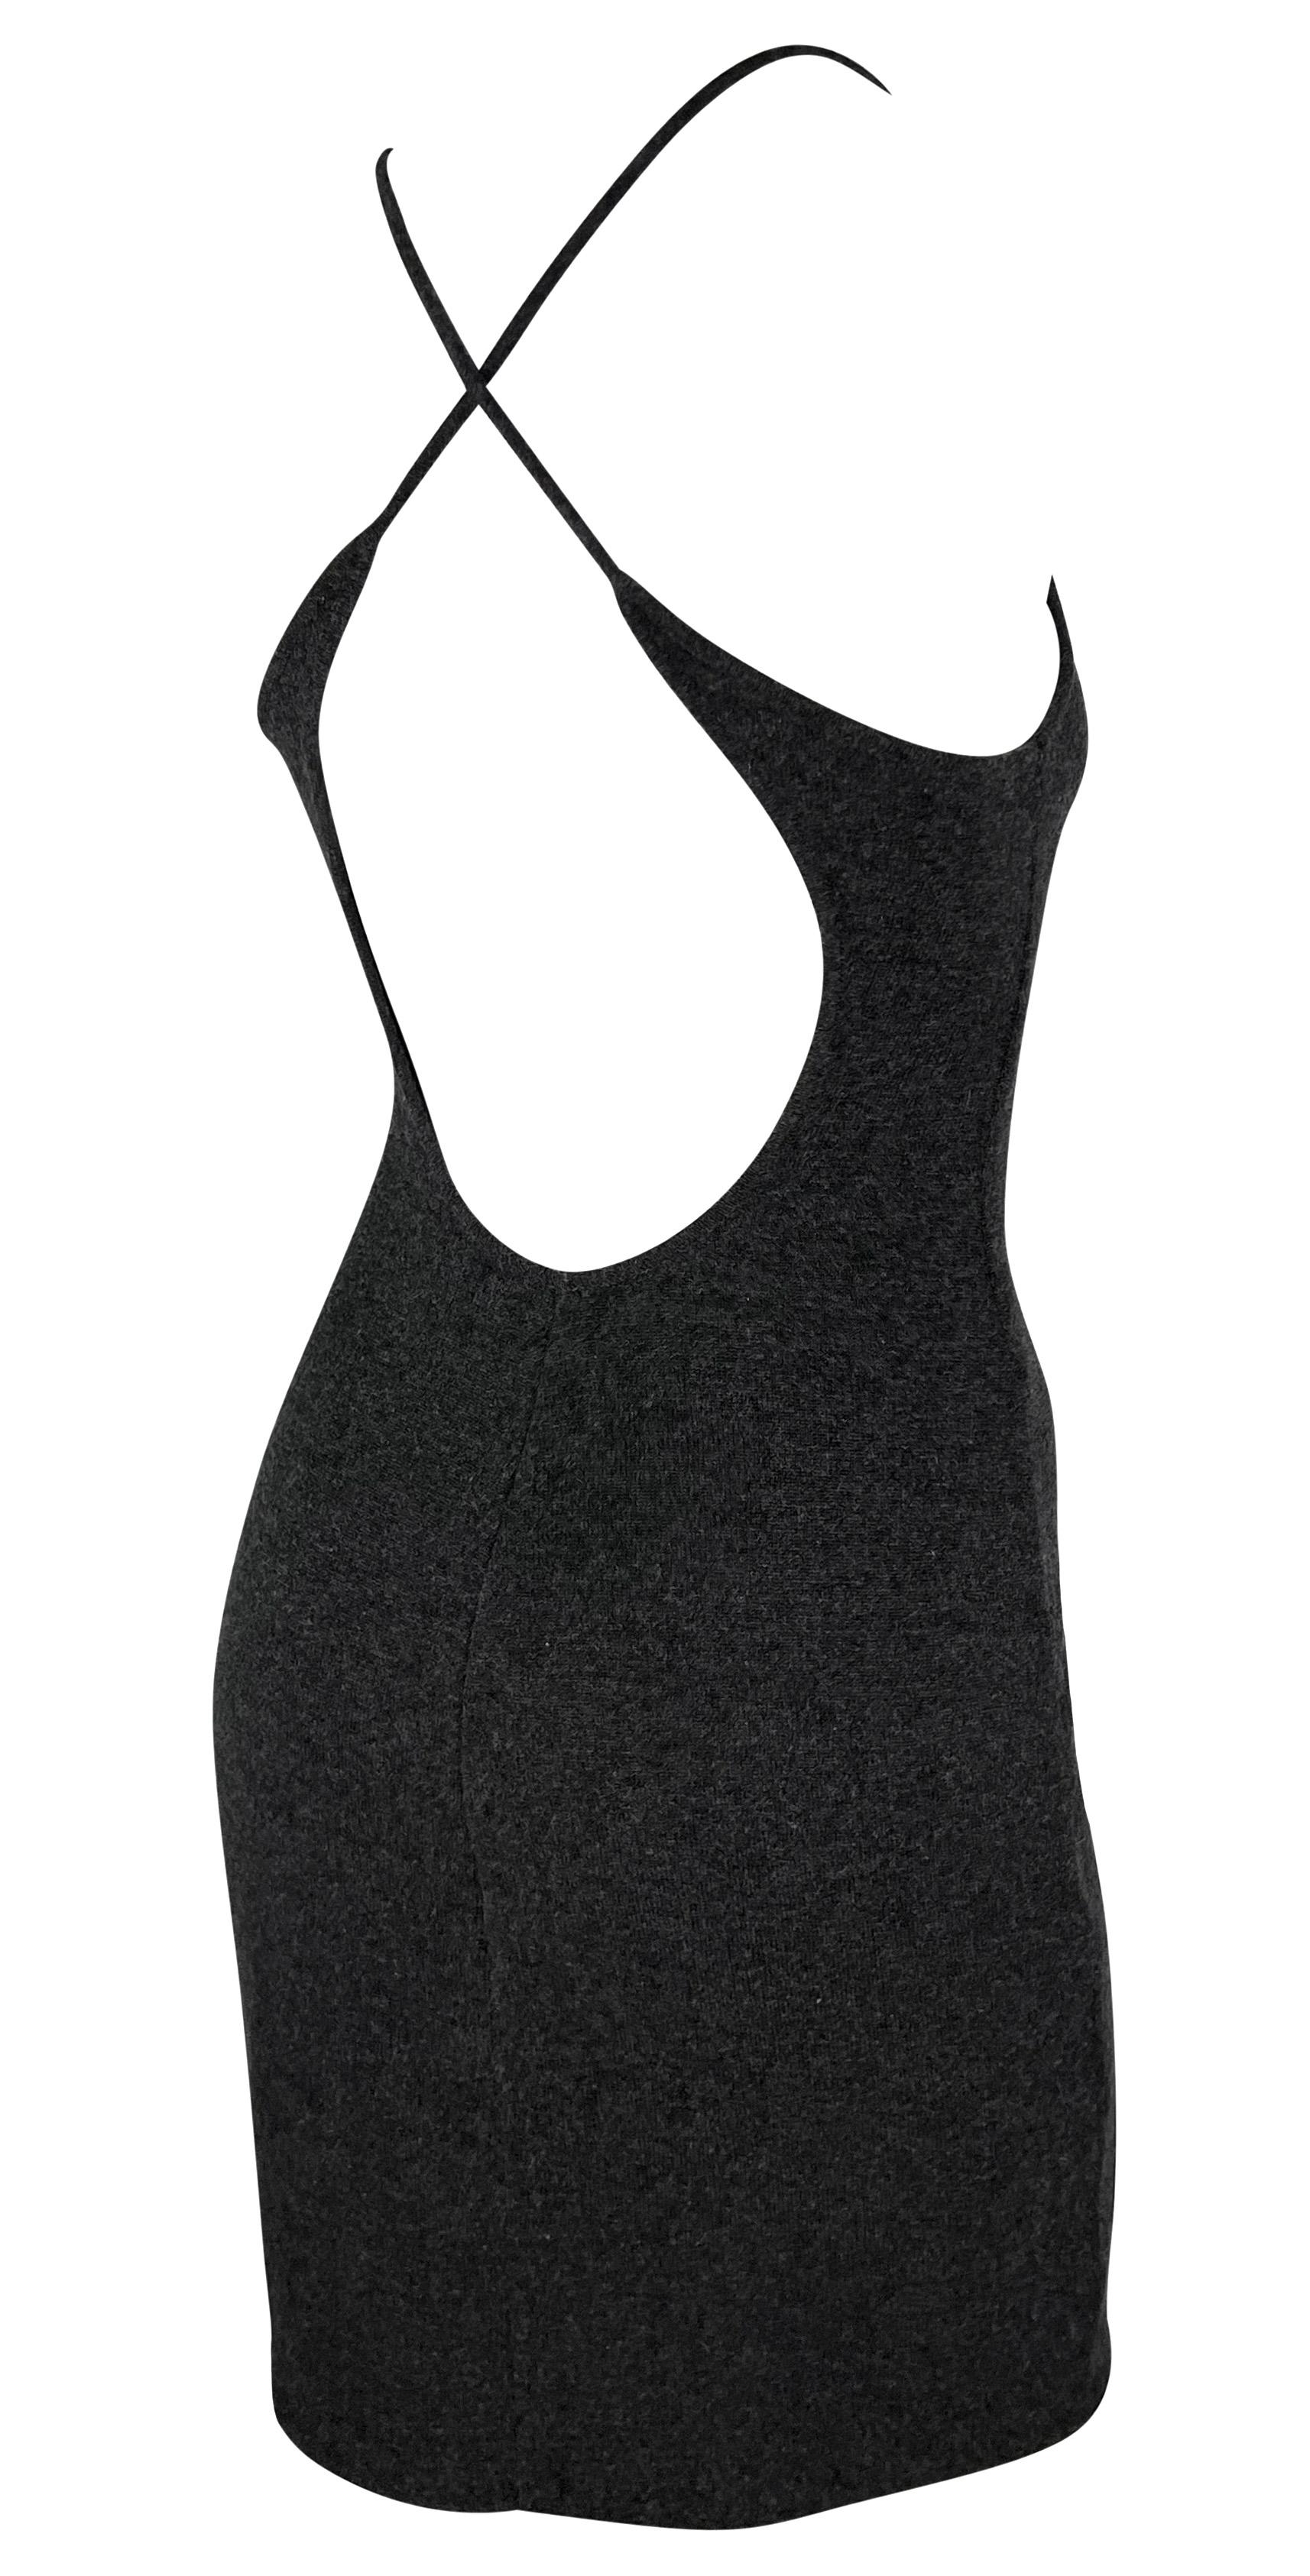 This dark grey knit Ralph Lauren purple label mini dress features a slip style constructed entirely of luxurious cashmere. The dress is complete with a scoop neckline and straps that cross over an exposed back. 

Approximate measurements:
Size -